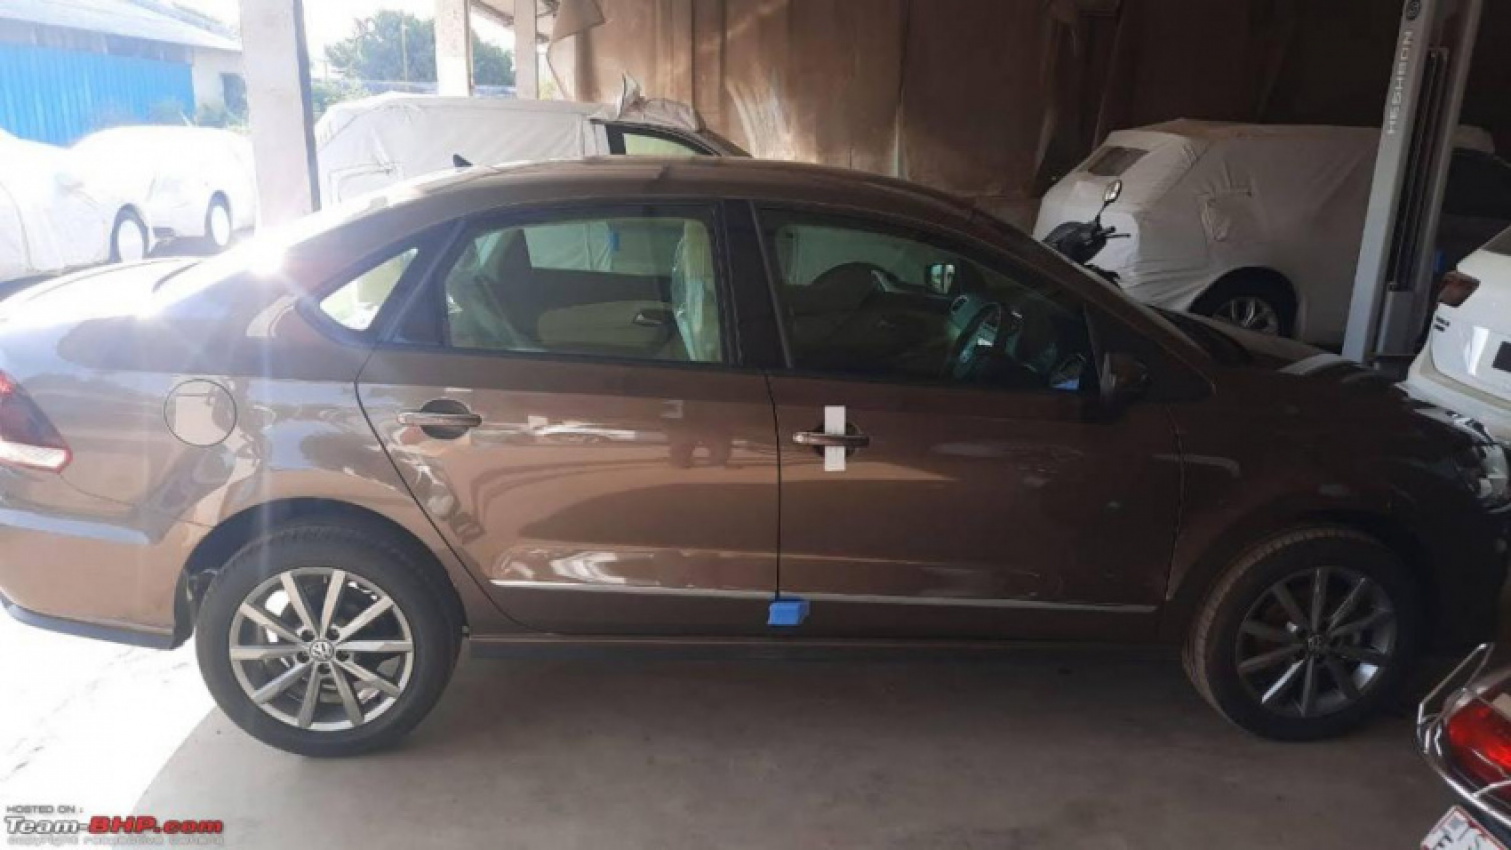 autos, cars, volkswagen, amazon, android, indian, manual, member content, sedan, tsi, turbo petrol, volkswagen india, volkswagen vento, amazon, android, purchase experience & initial ownership review: volkswagen vento tsi mt